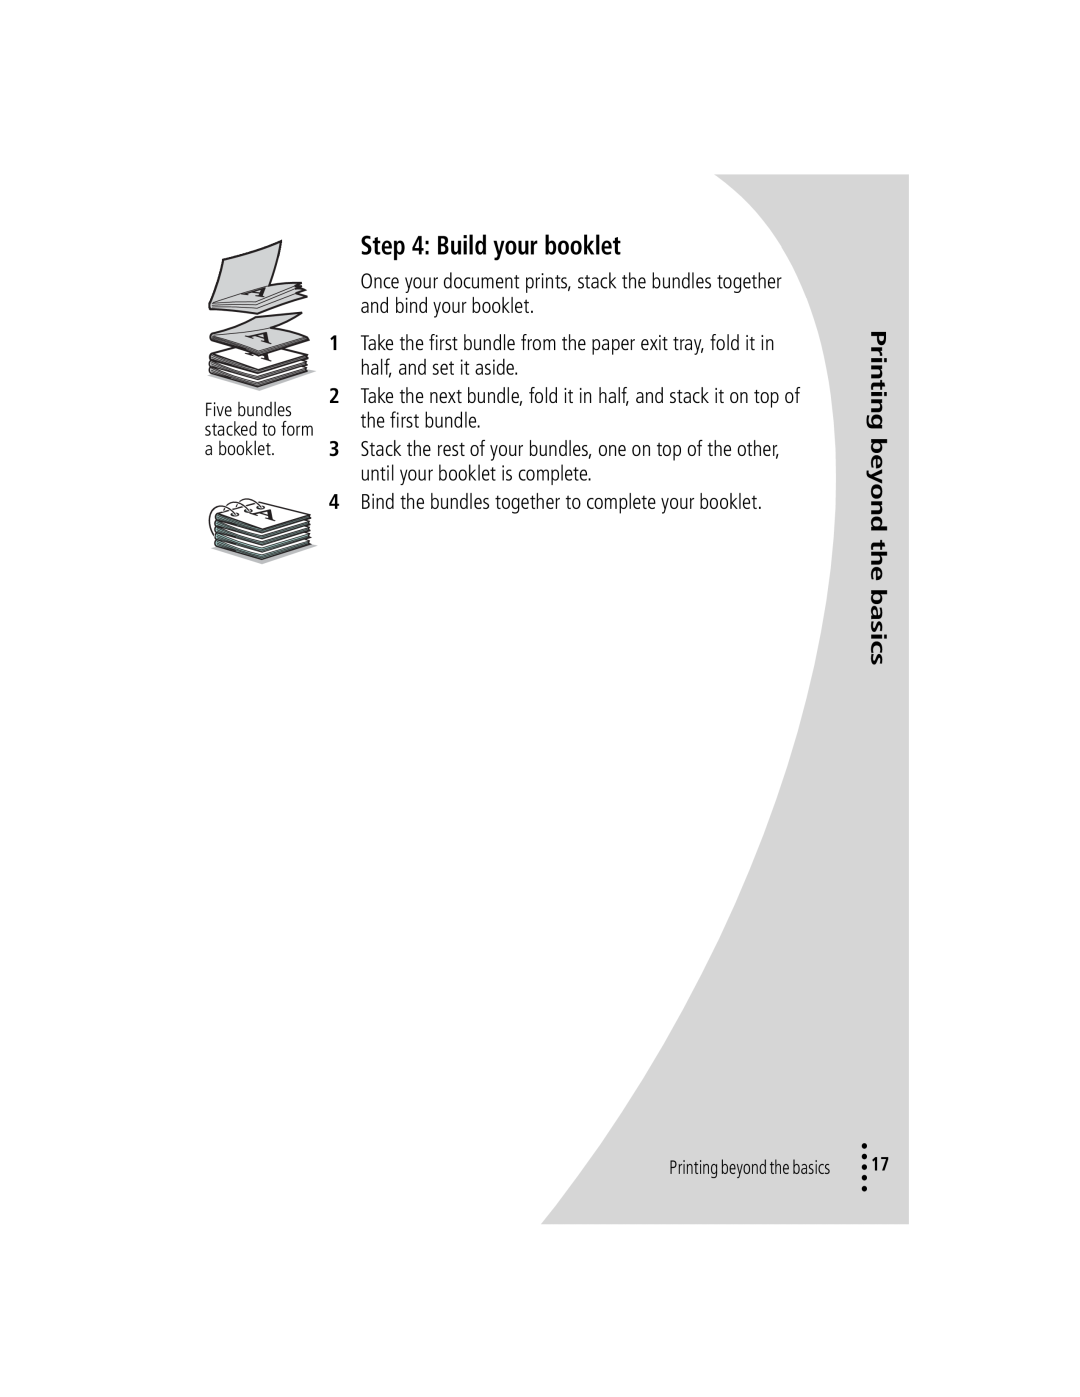 Lexmark Z42 manual Build your booklet, Printing beyond the basics 